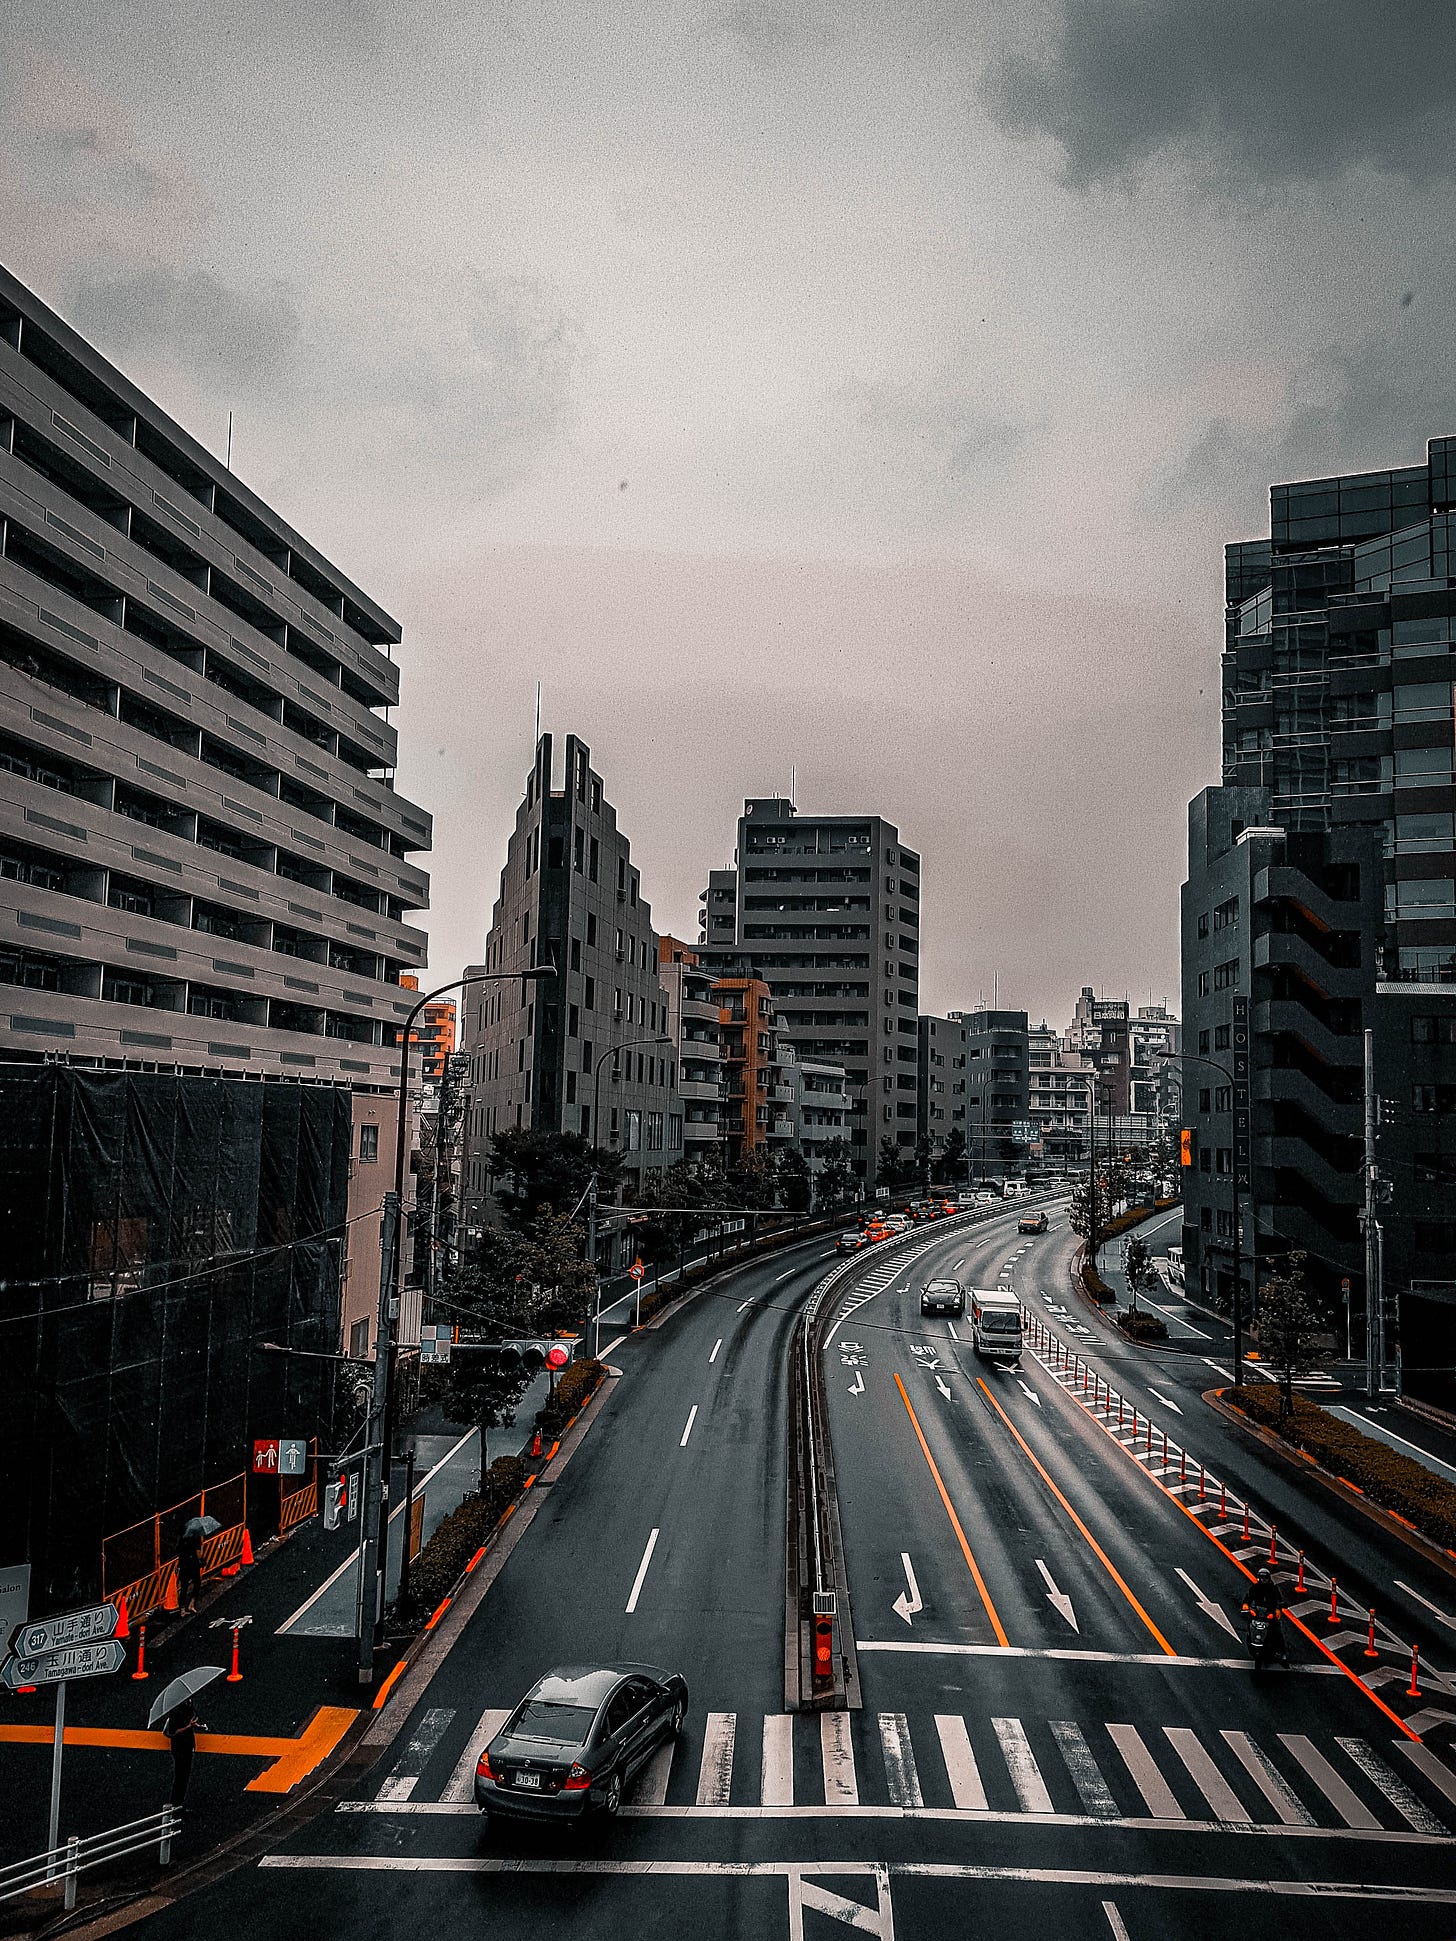 💥Streets of Tokyo by @AvaKhan1104